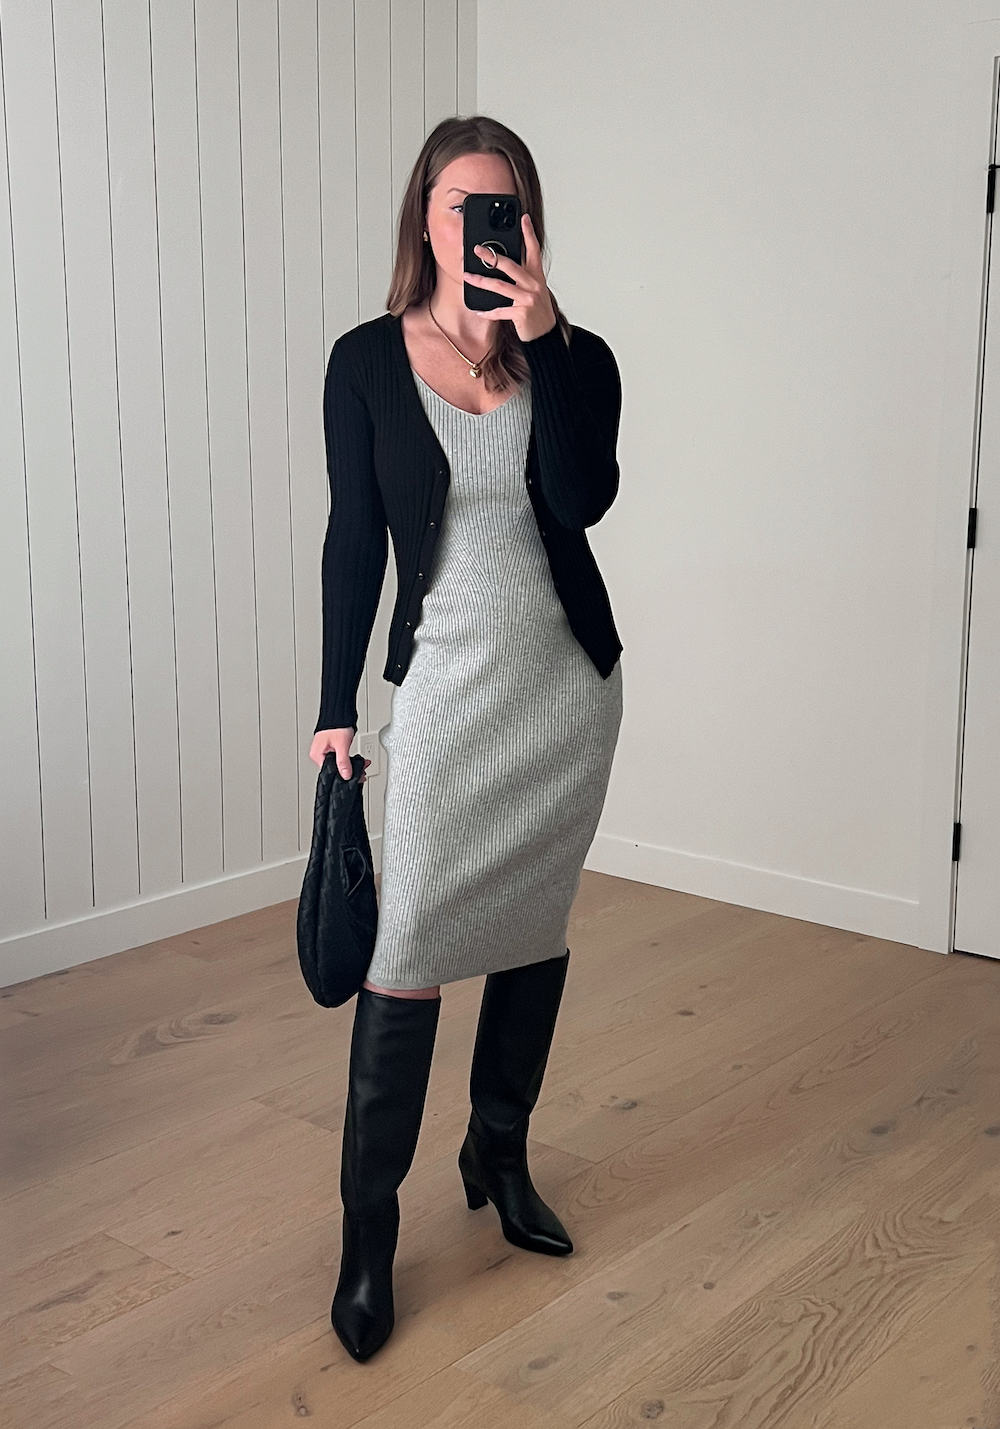 Christal wearing a grey sweater dress and a black cardigan with tall black boots.